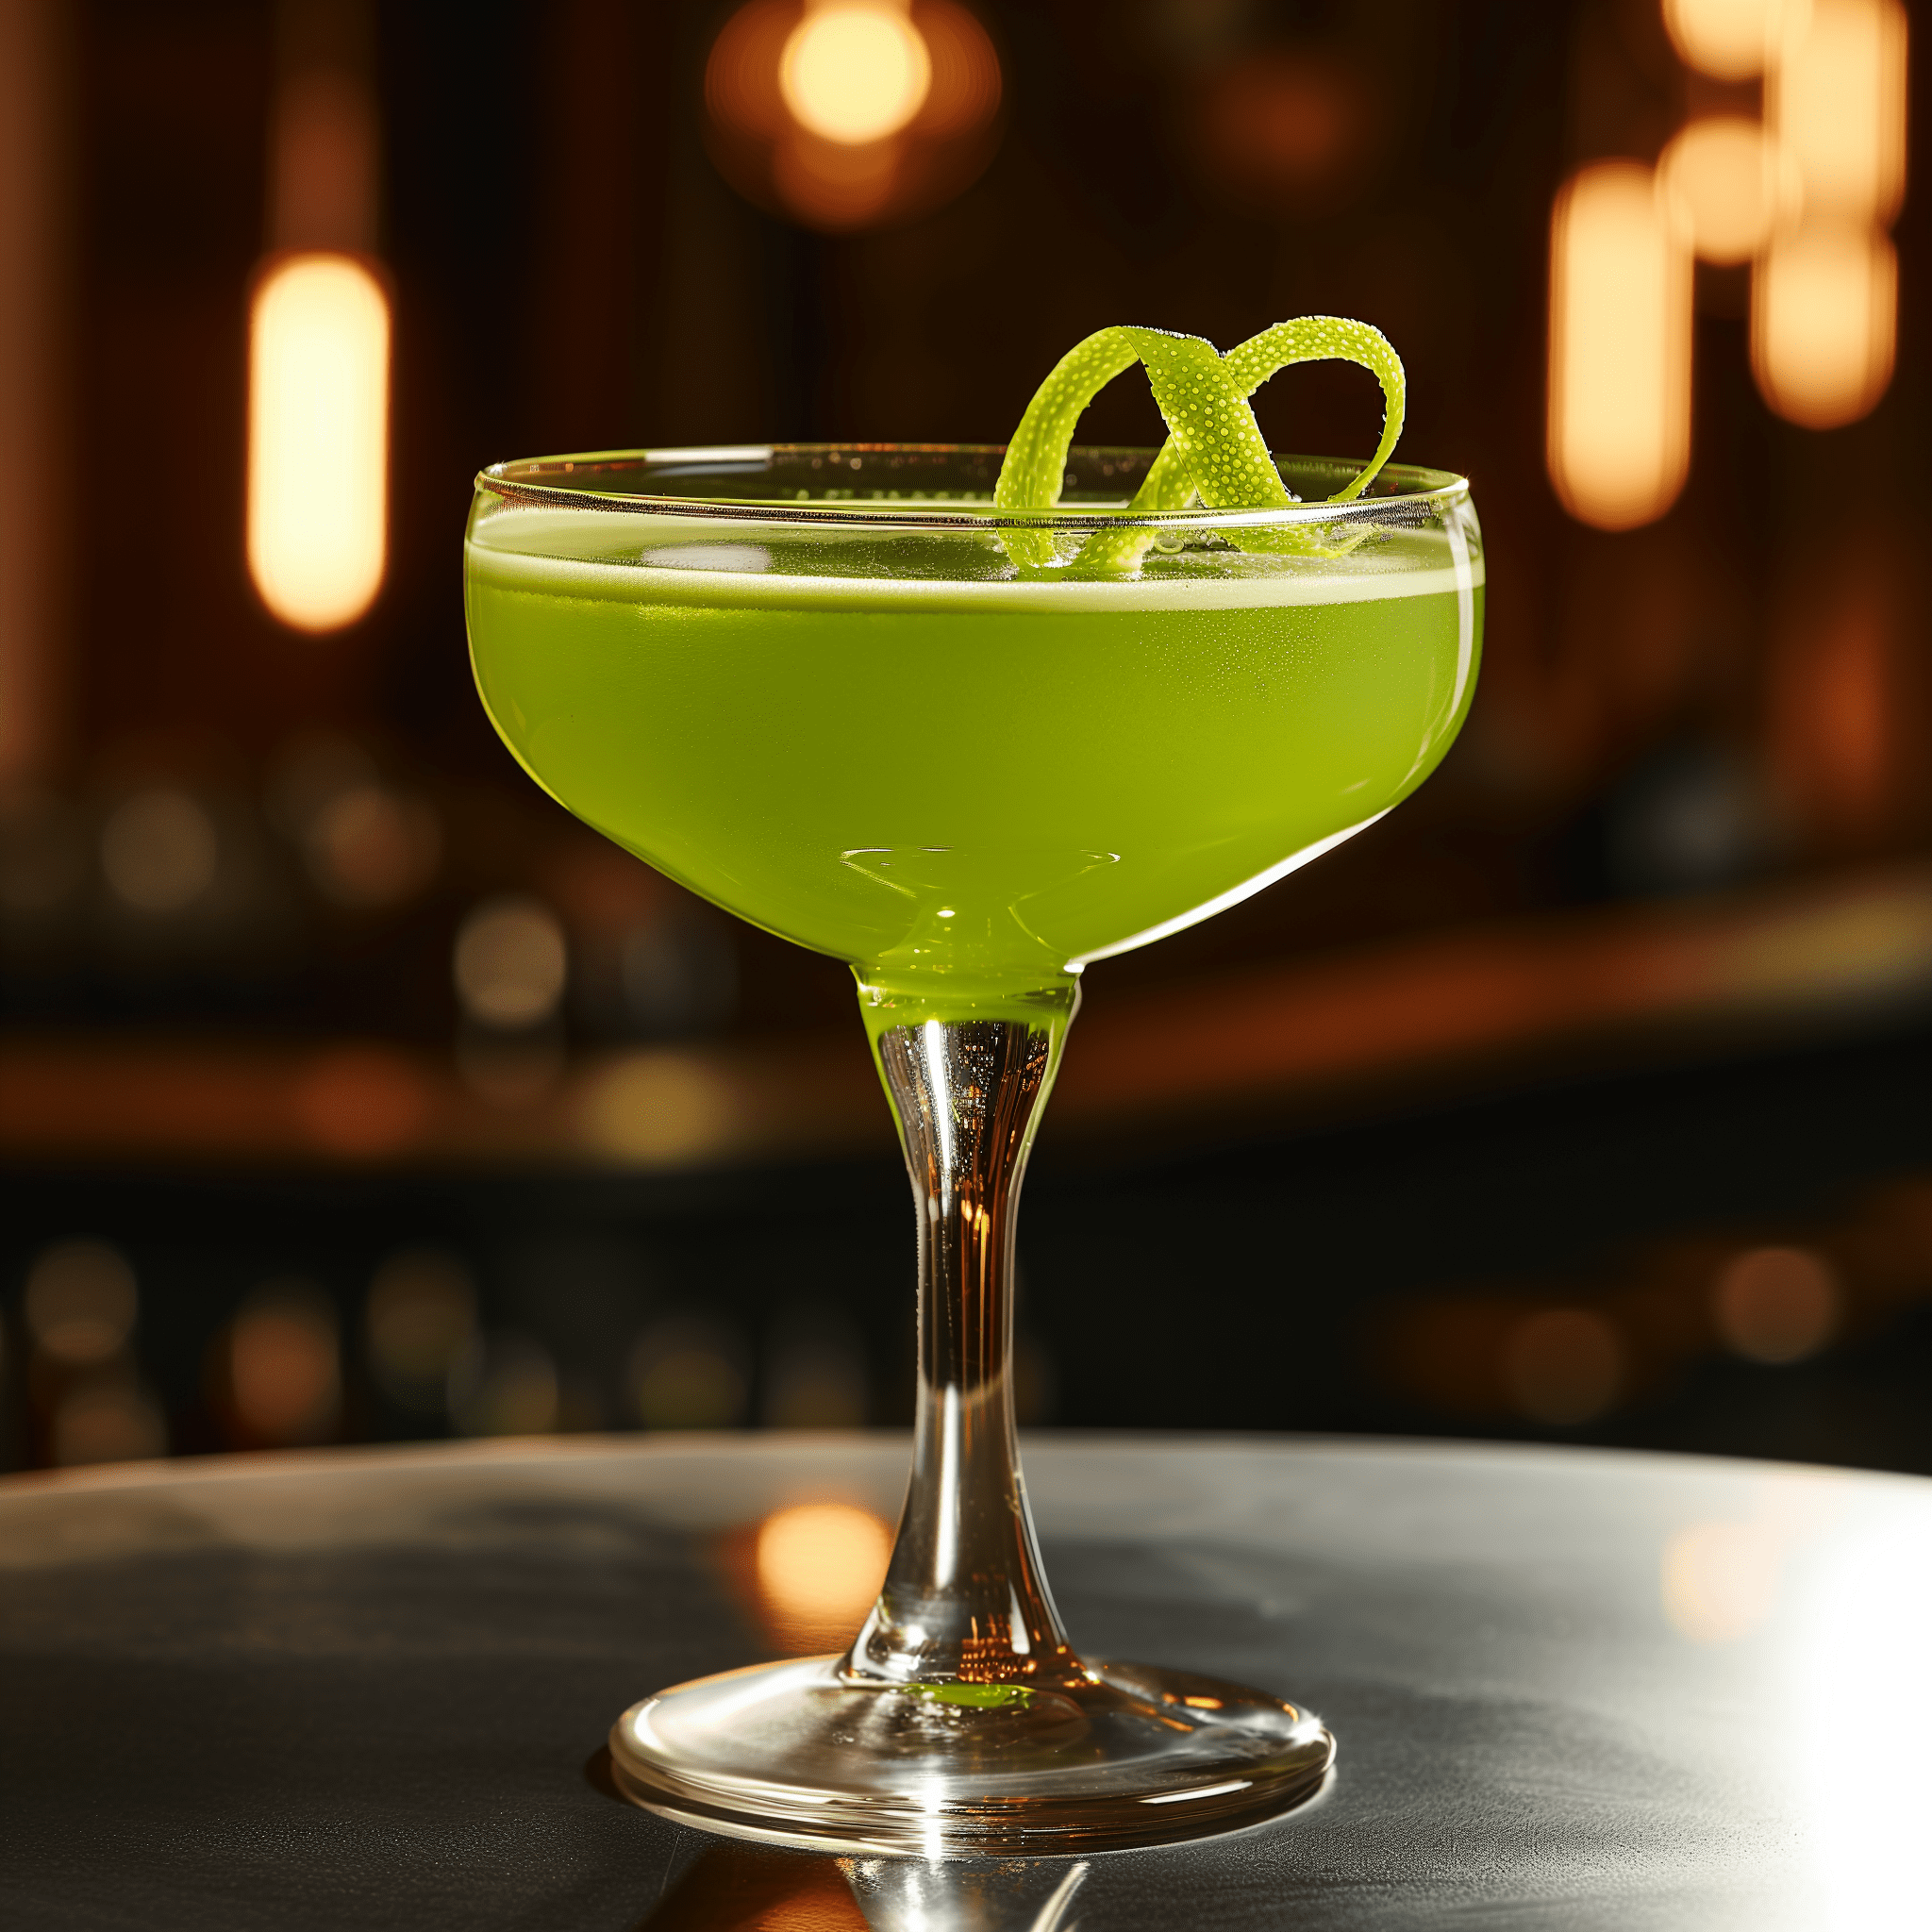 The Closing Argument is a symphony of complexity. It's smoky from the mezcal, herbal and slightly sweet from the Green Chartreuse, with a nutty cherry undertone from the Luxardo Maraschino. The lime juice adds a necessary tang, balancing the cocktail with a refreshing acidity.